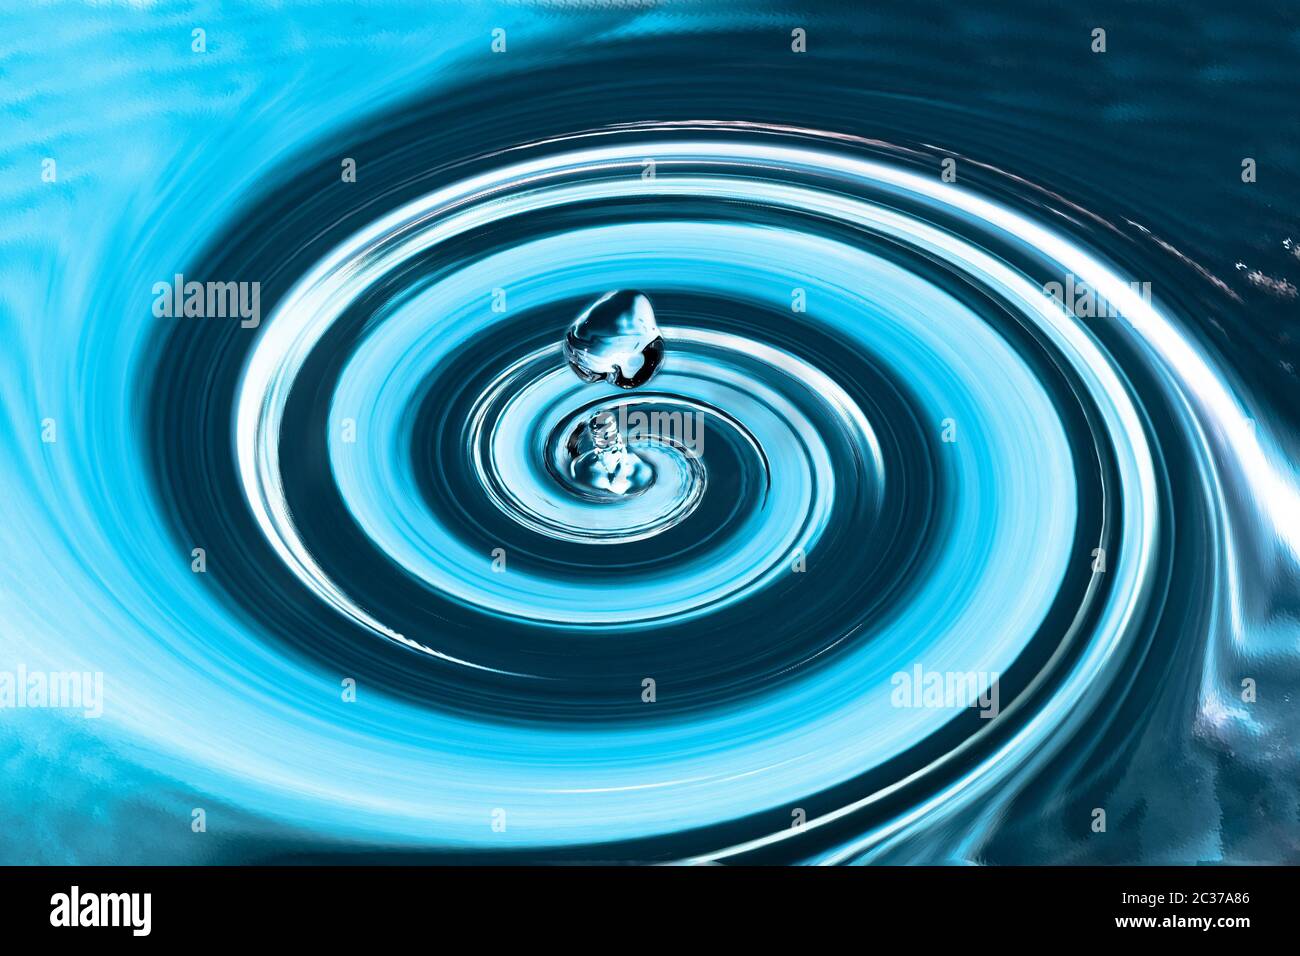 Abstract circular movement of water with a drop in the middle. A splash of water, moving water in a spiral. Stock Photo